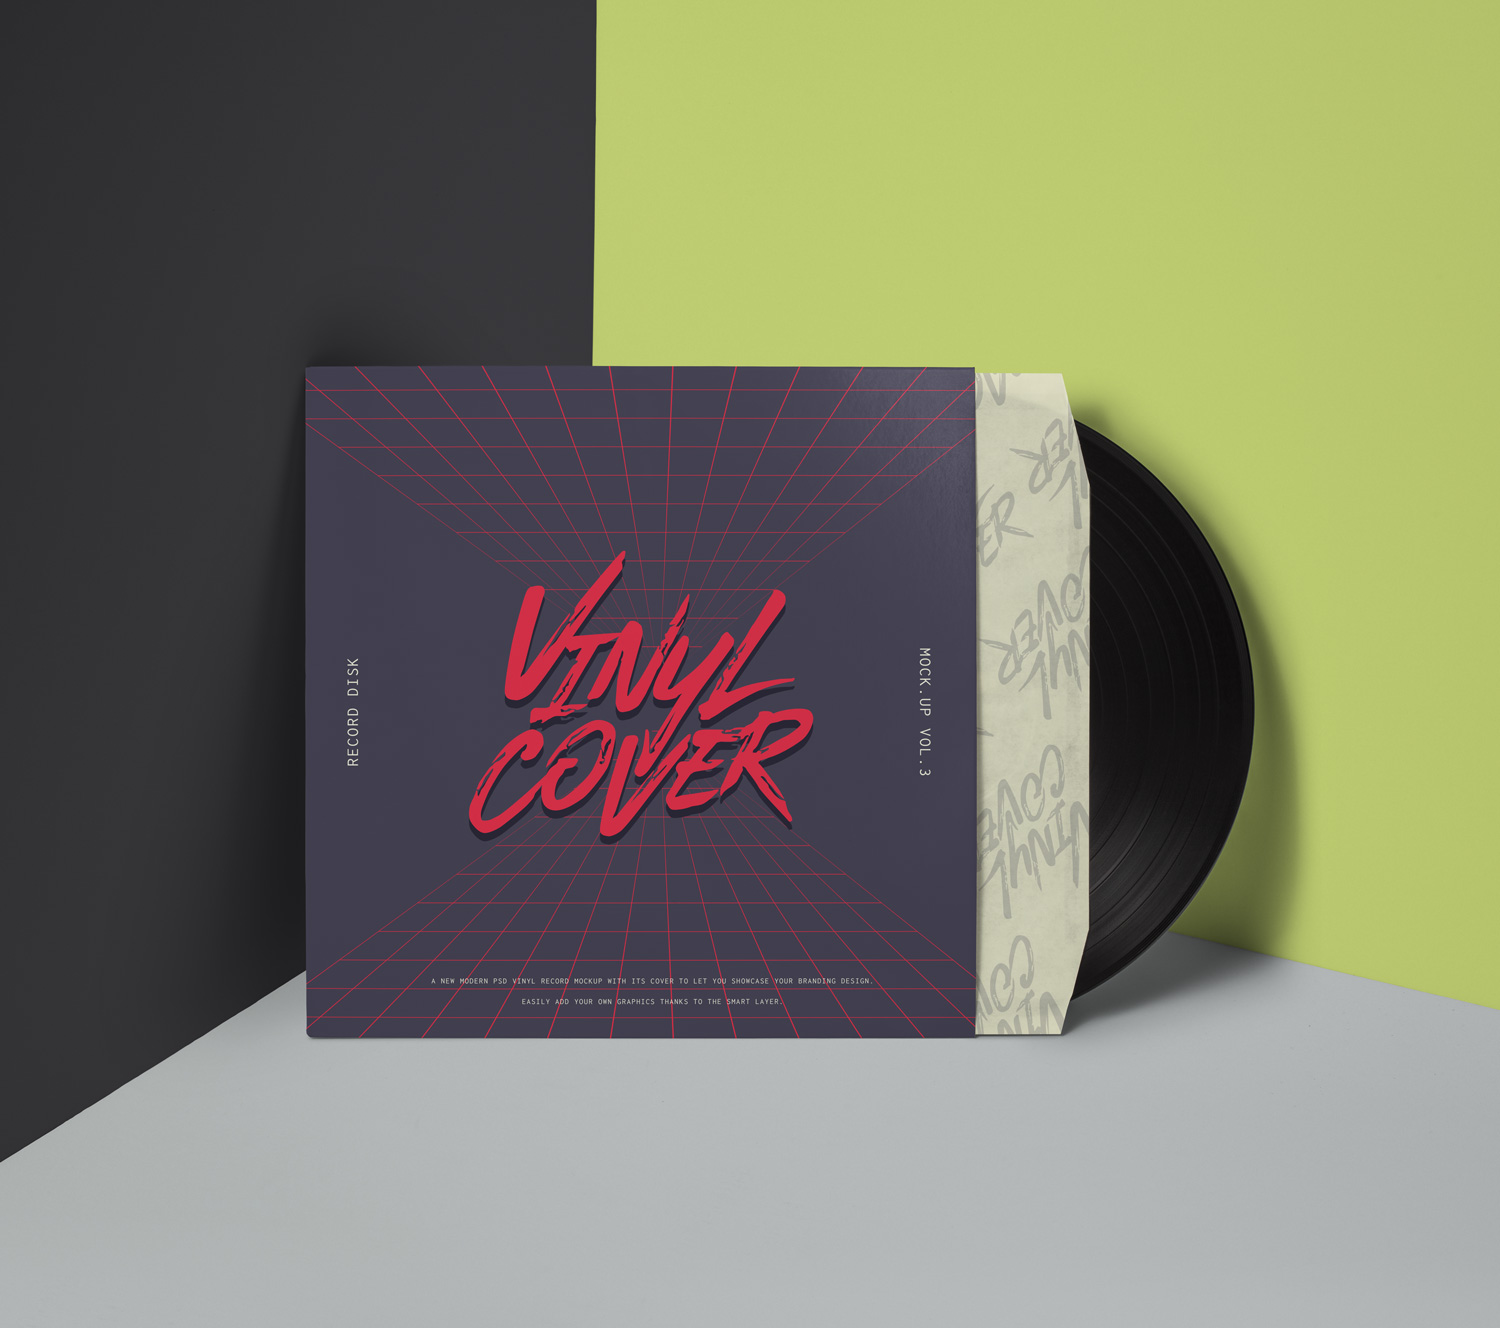 Download Vinyl-Cover-Record-Free-Mock-Up | Free Mockup